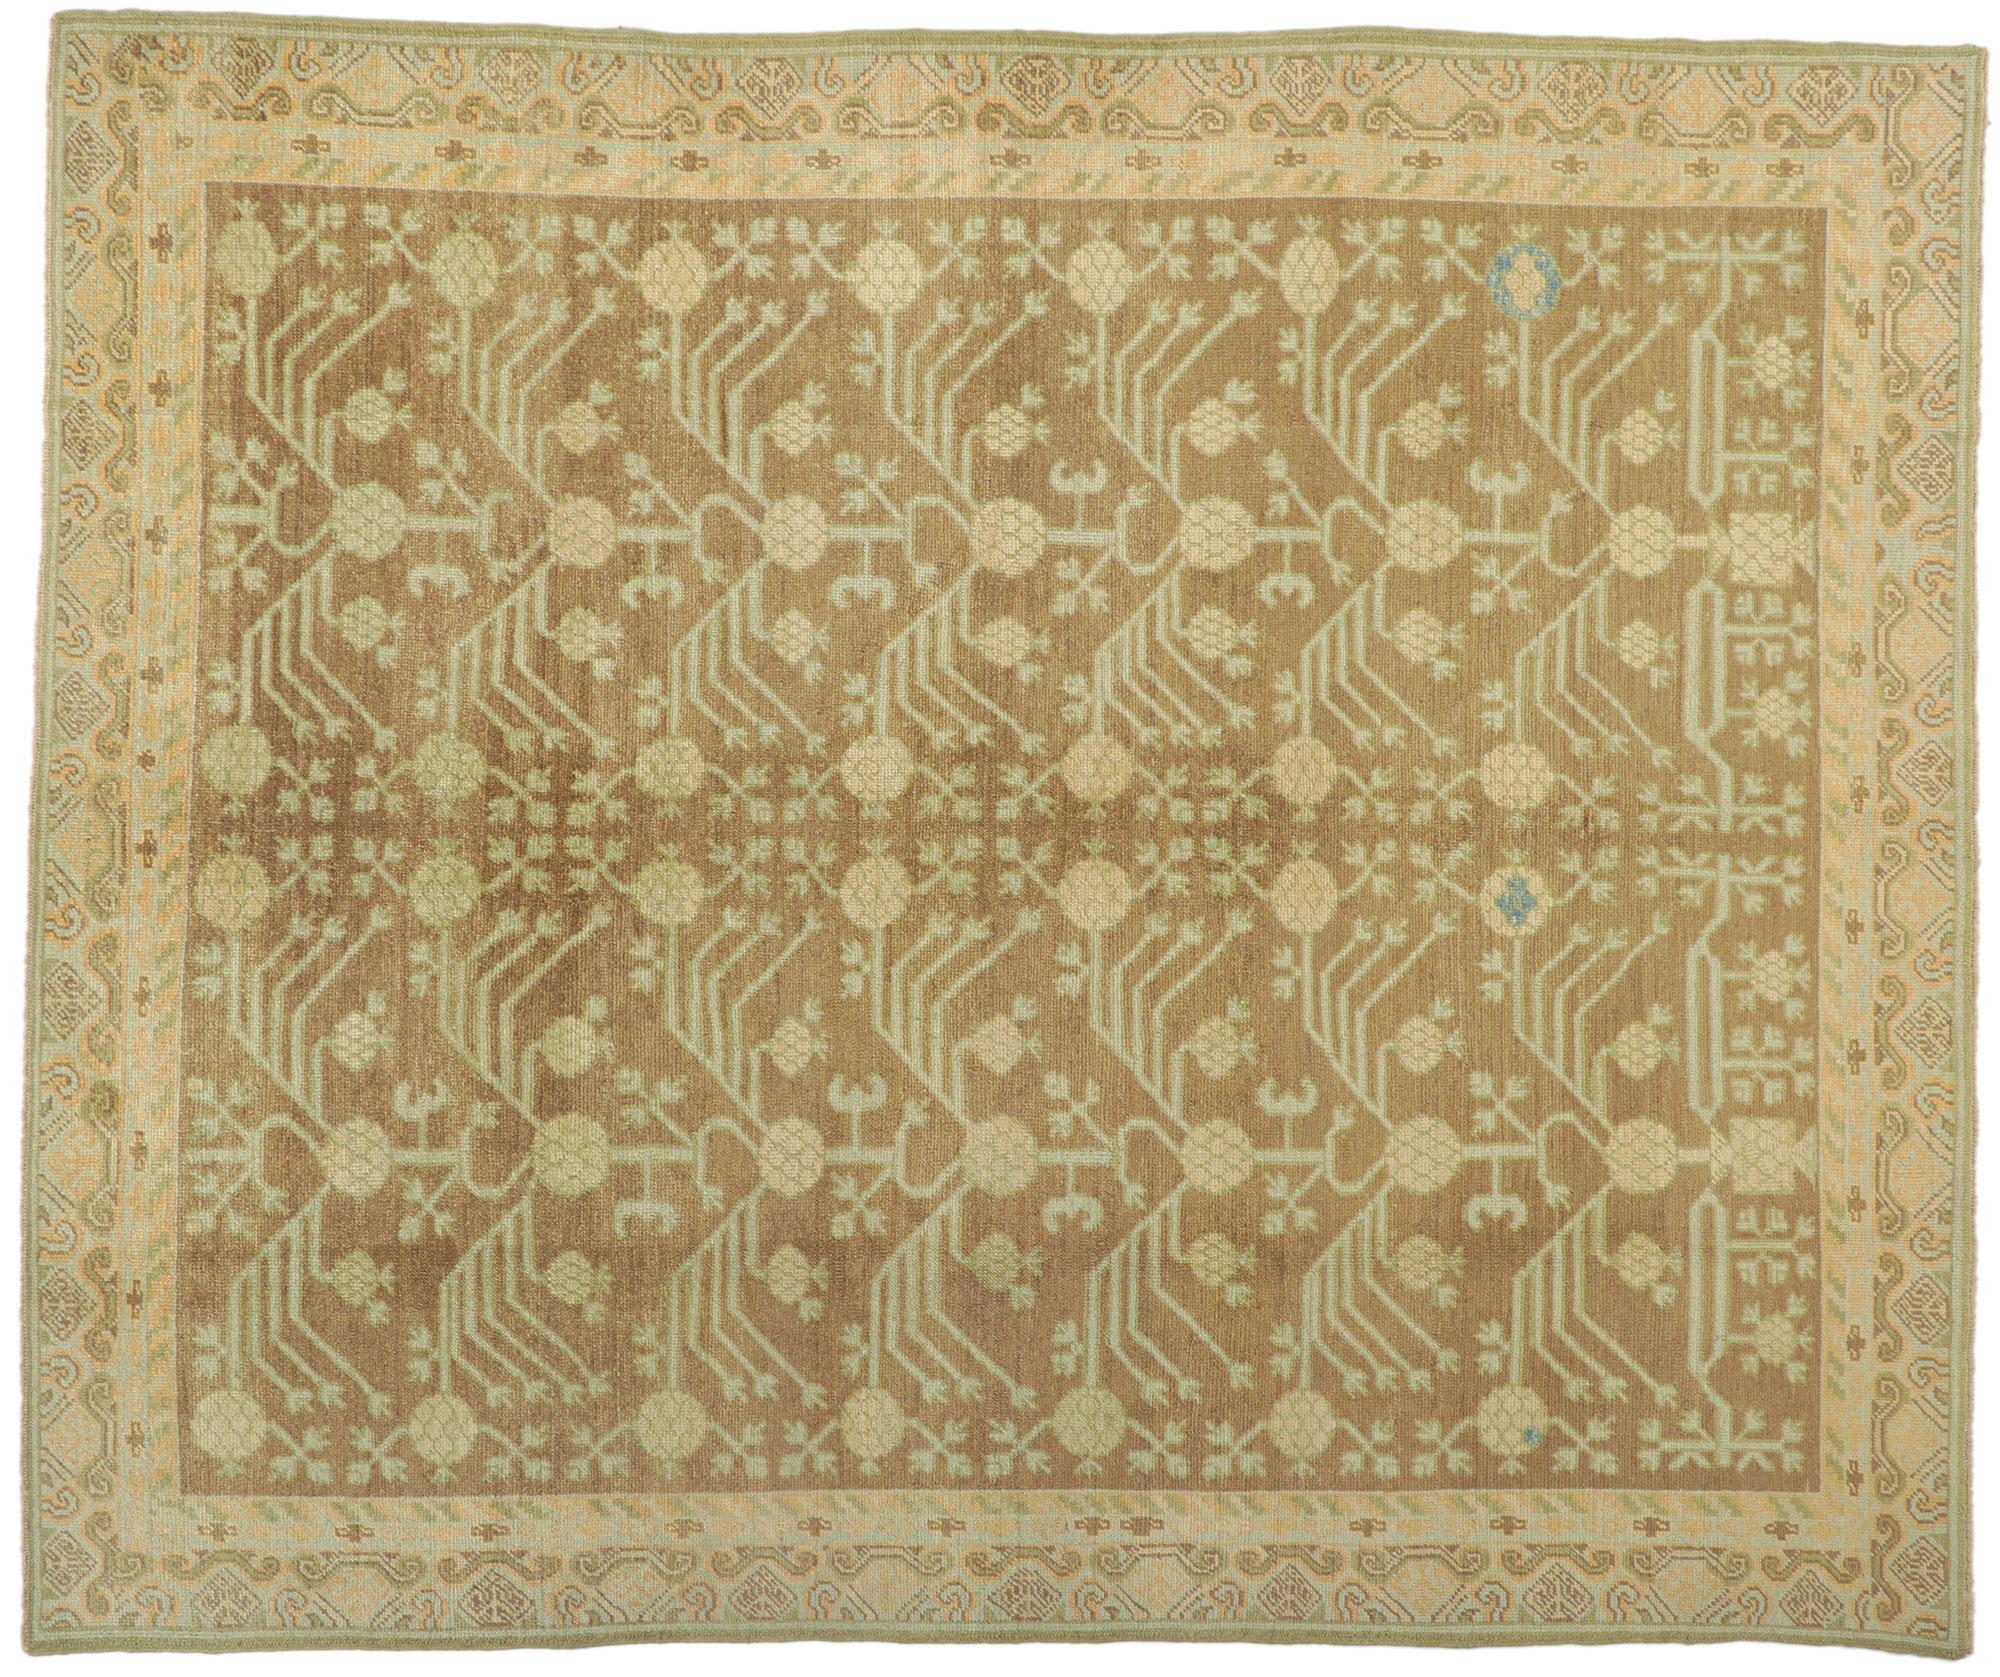 New Turkish Khotan Rug with Earth-Tone Colors For Sale 4